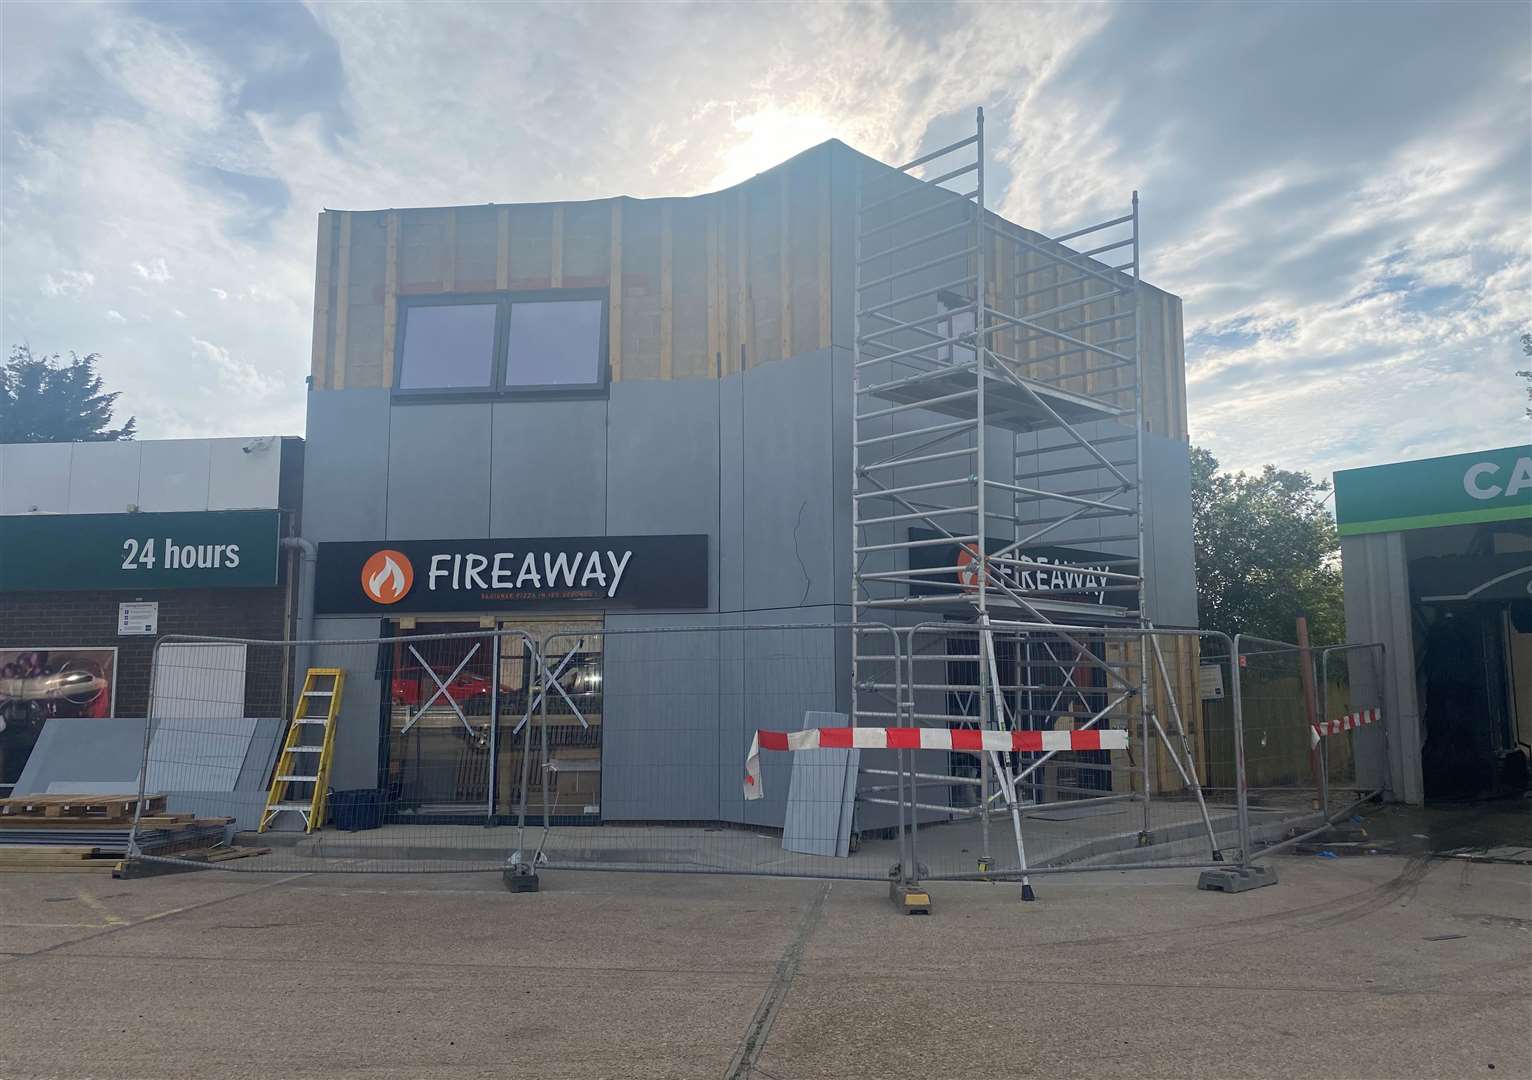 Fireaway Pizza wants to open 24 hours in Whitfield, Dover